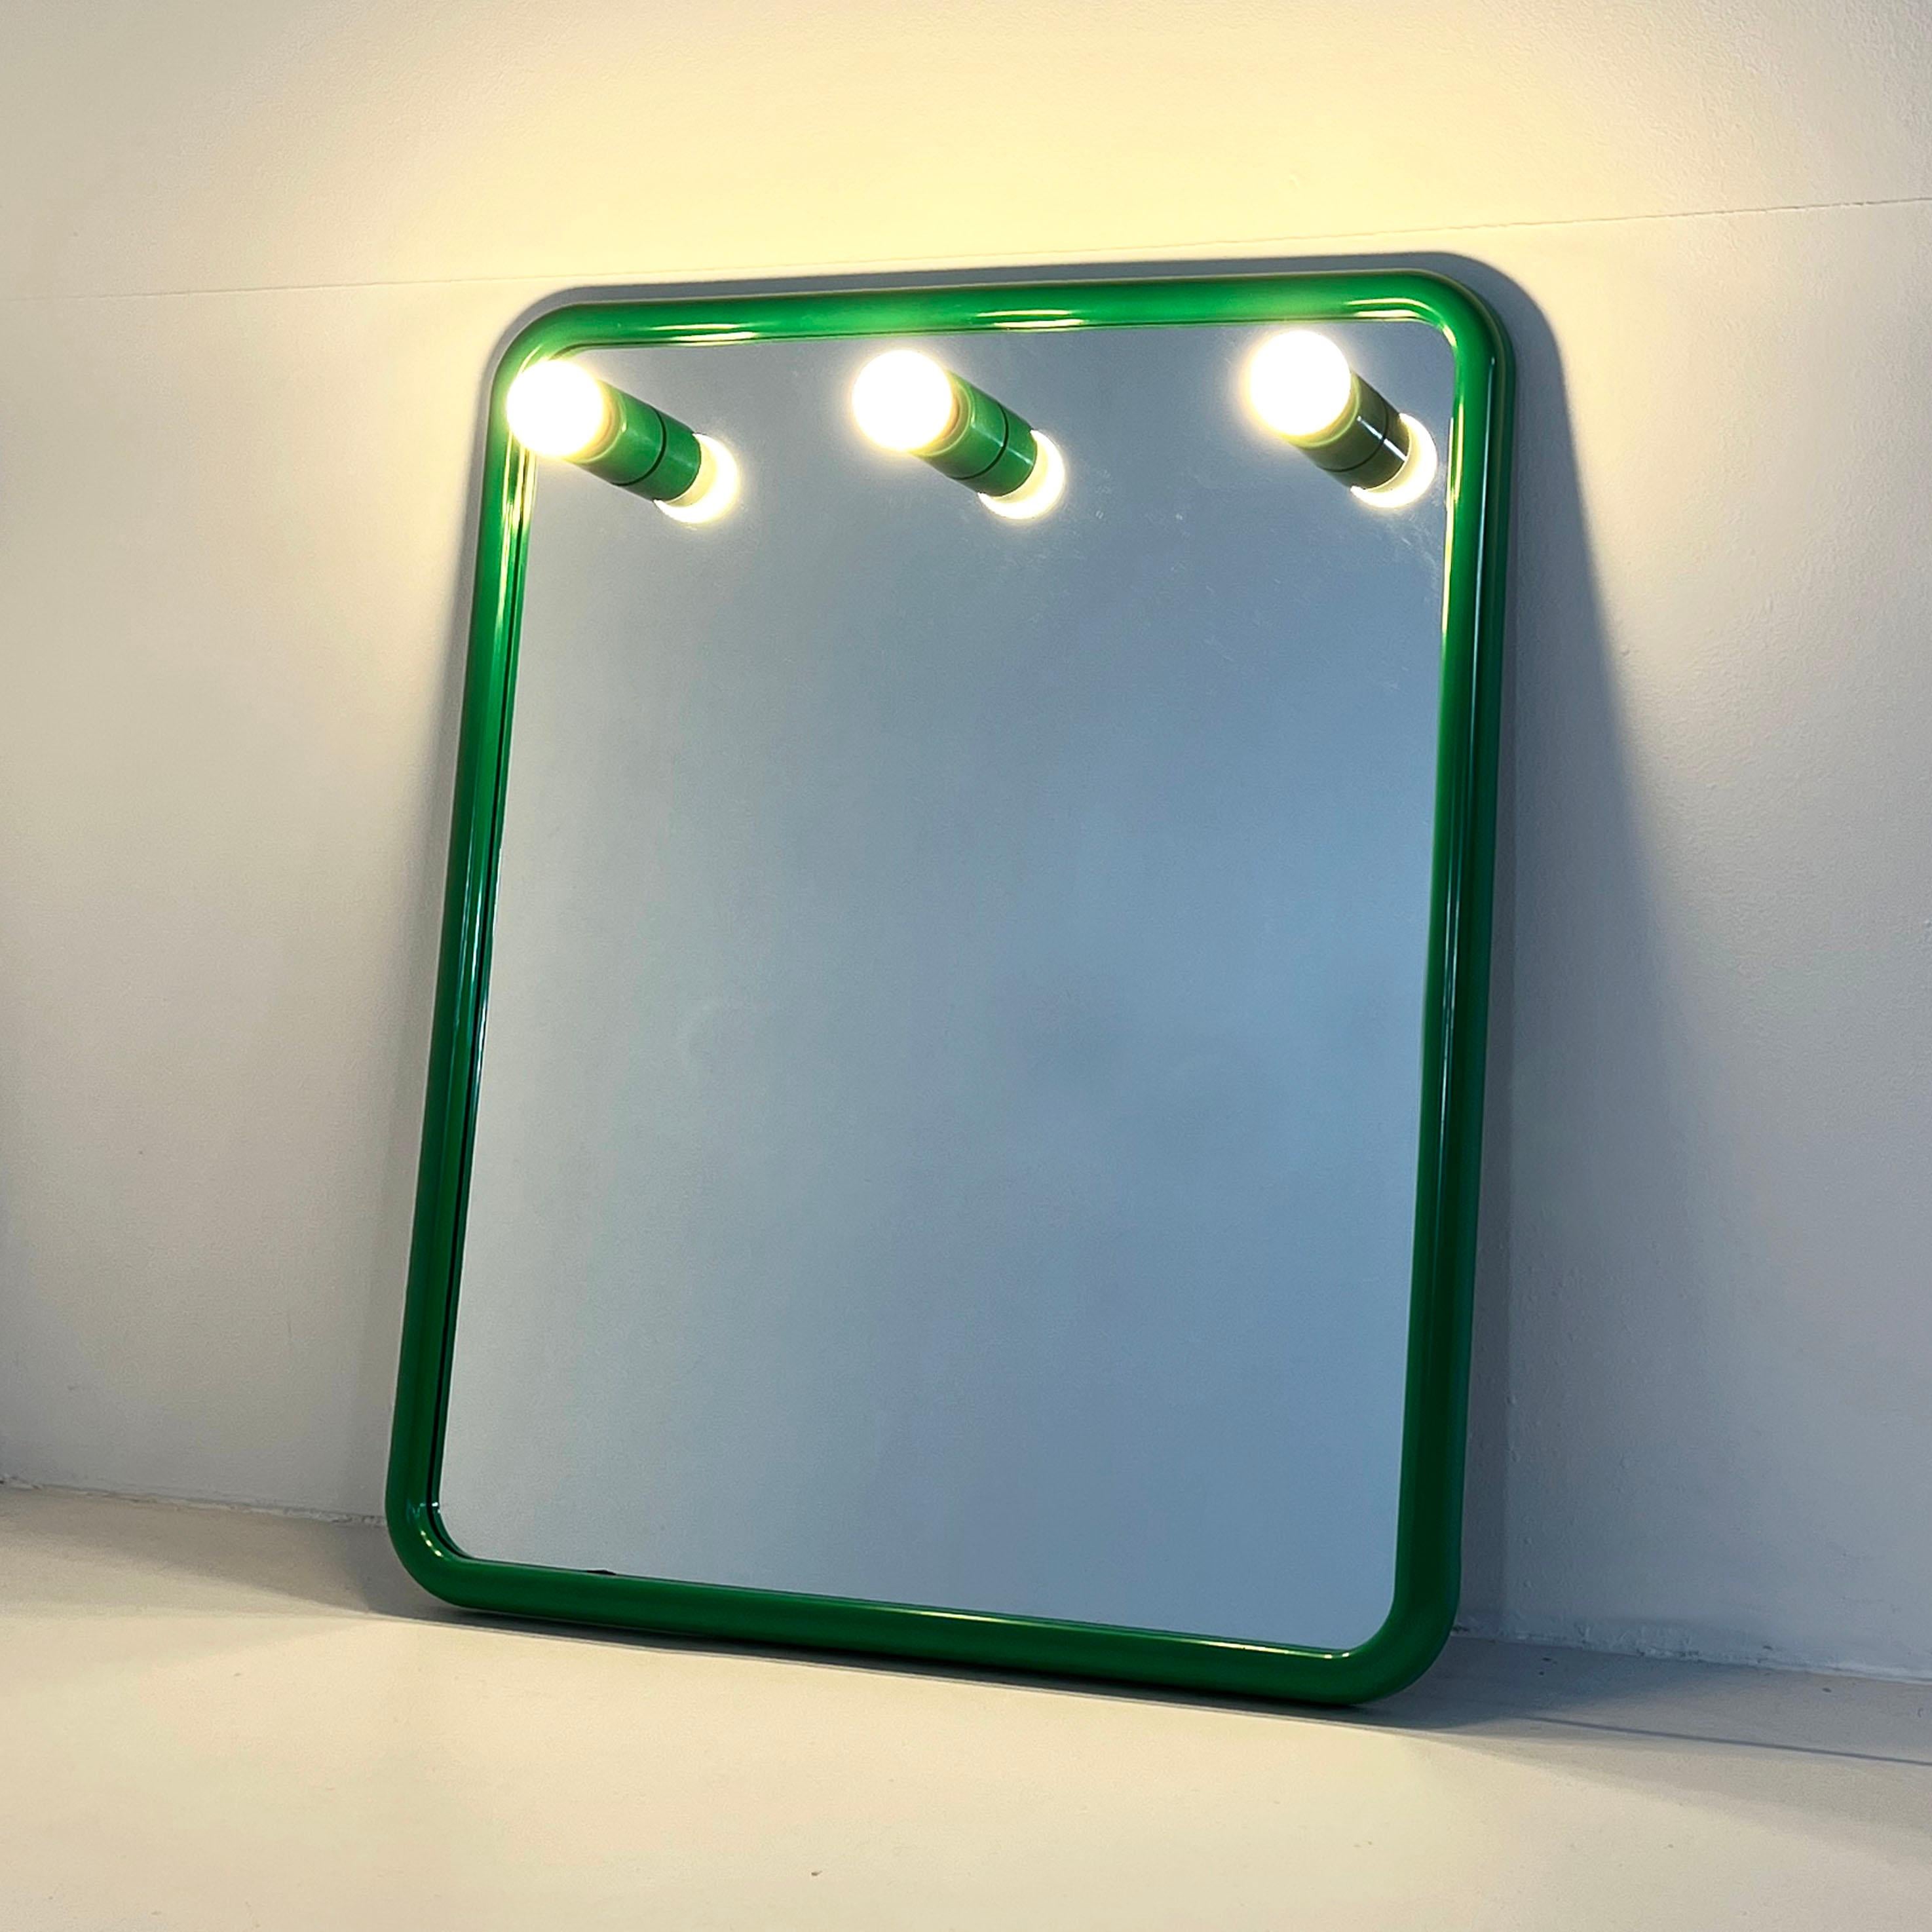 Producer - Gedy
Design Period - Seventies
Measurements - Width 58 cm x Depth 10 cm x Height 64 cm 
Materials - Plastic
Color - Green

Condition - Good 
Comments - Light wear consistent with age and use. Some light scuffs.